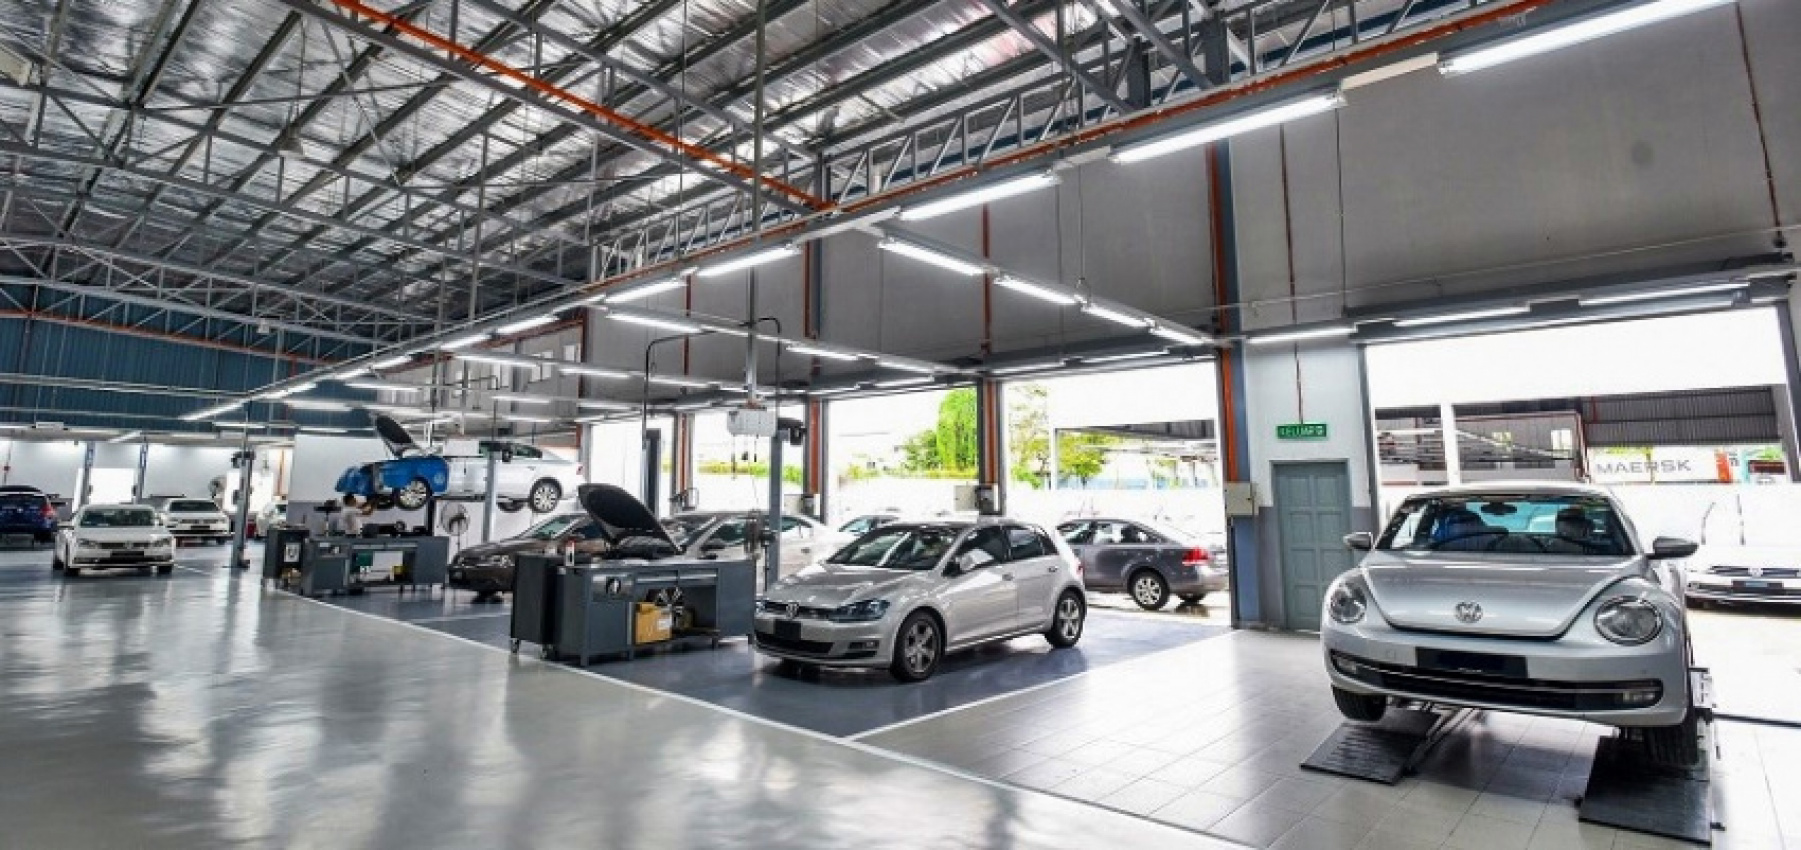 autos, cars, volkswagen, authorised volkswagen showrooms, national recovery plan, showrooms, volkswagen dealers, volkswagen malaysia, volkswagen passenger cars malaysia, most volkswagen showrooms in malaysia open for business again